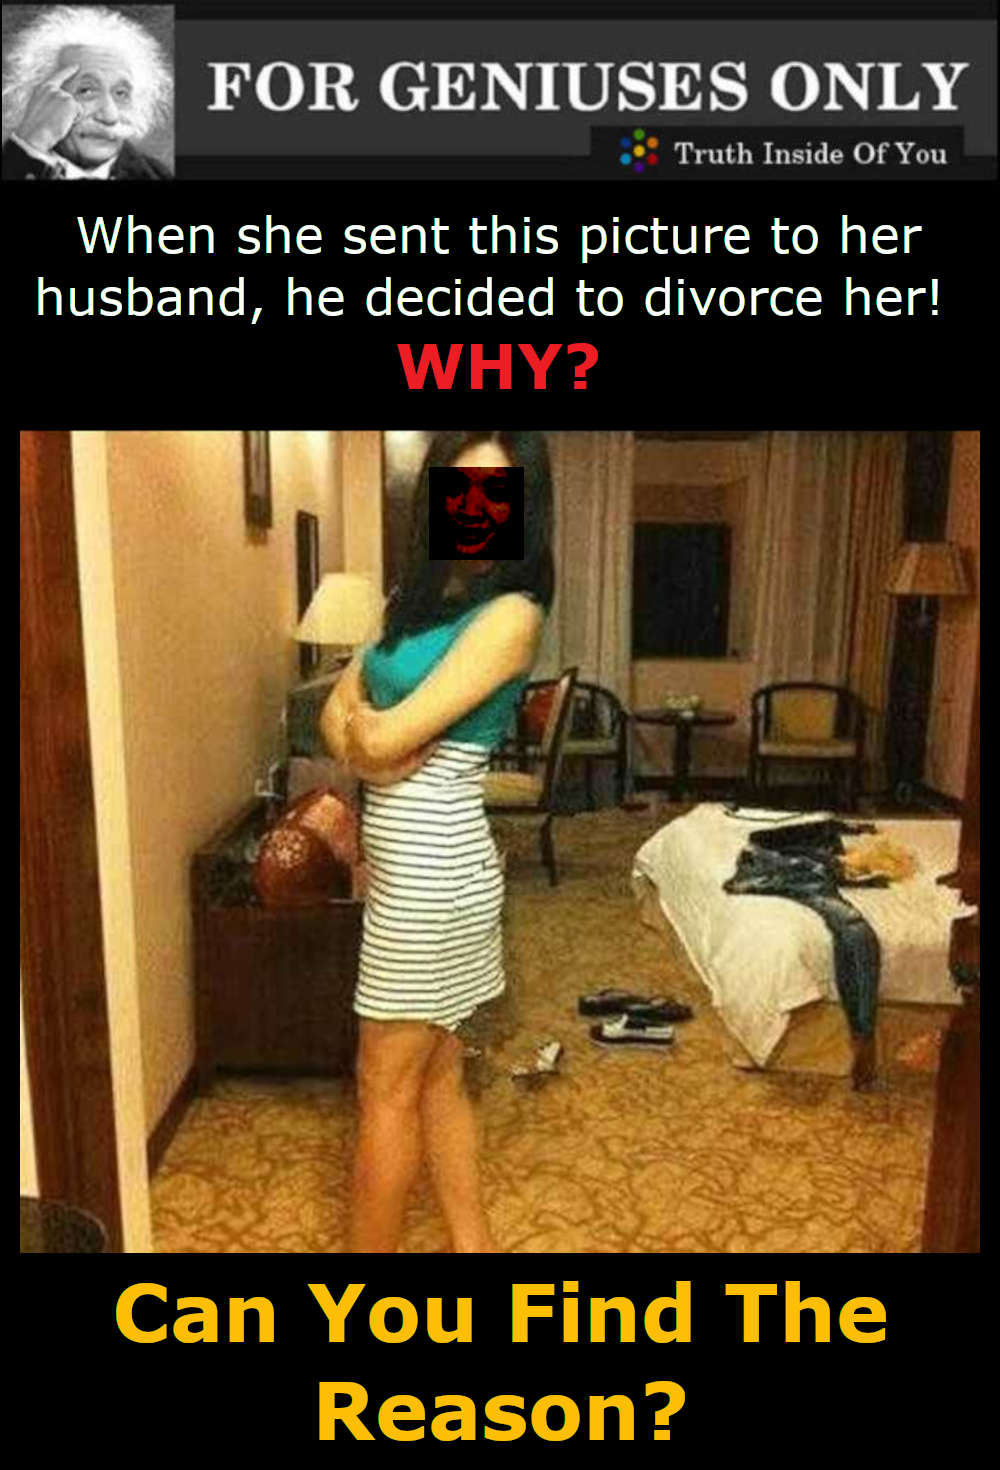 When she sent this picture to her husband, he decided to divorce her! WHY?